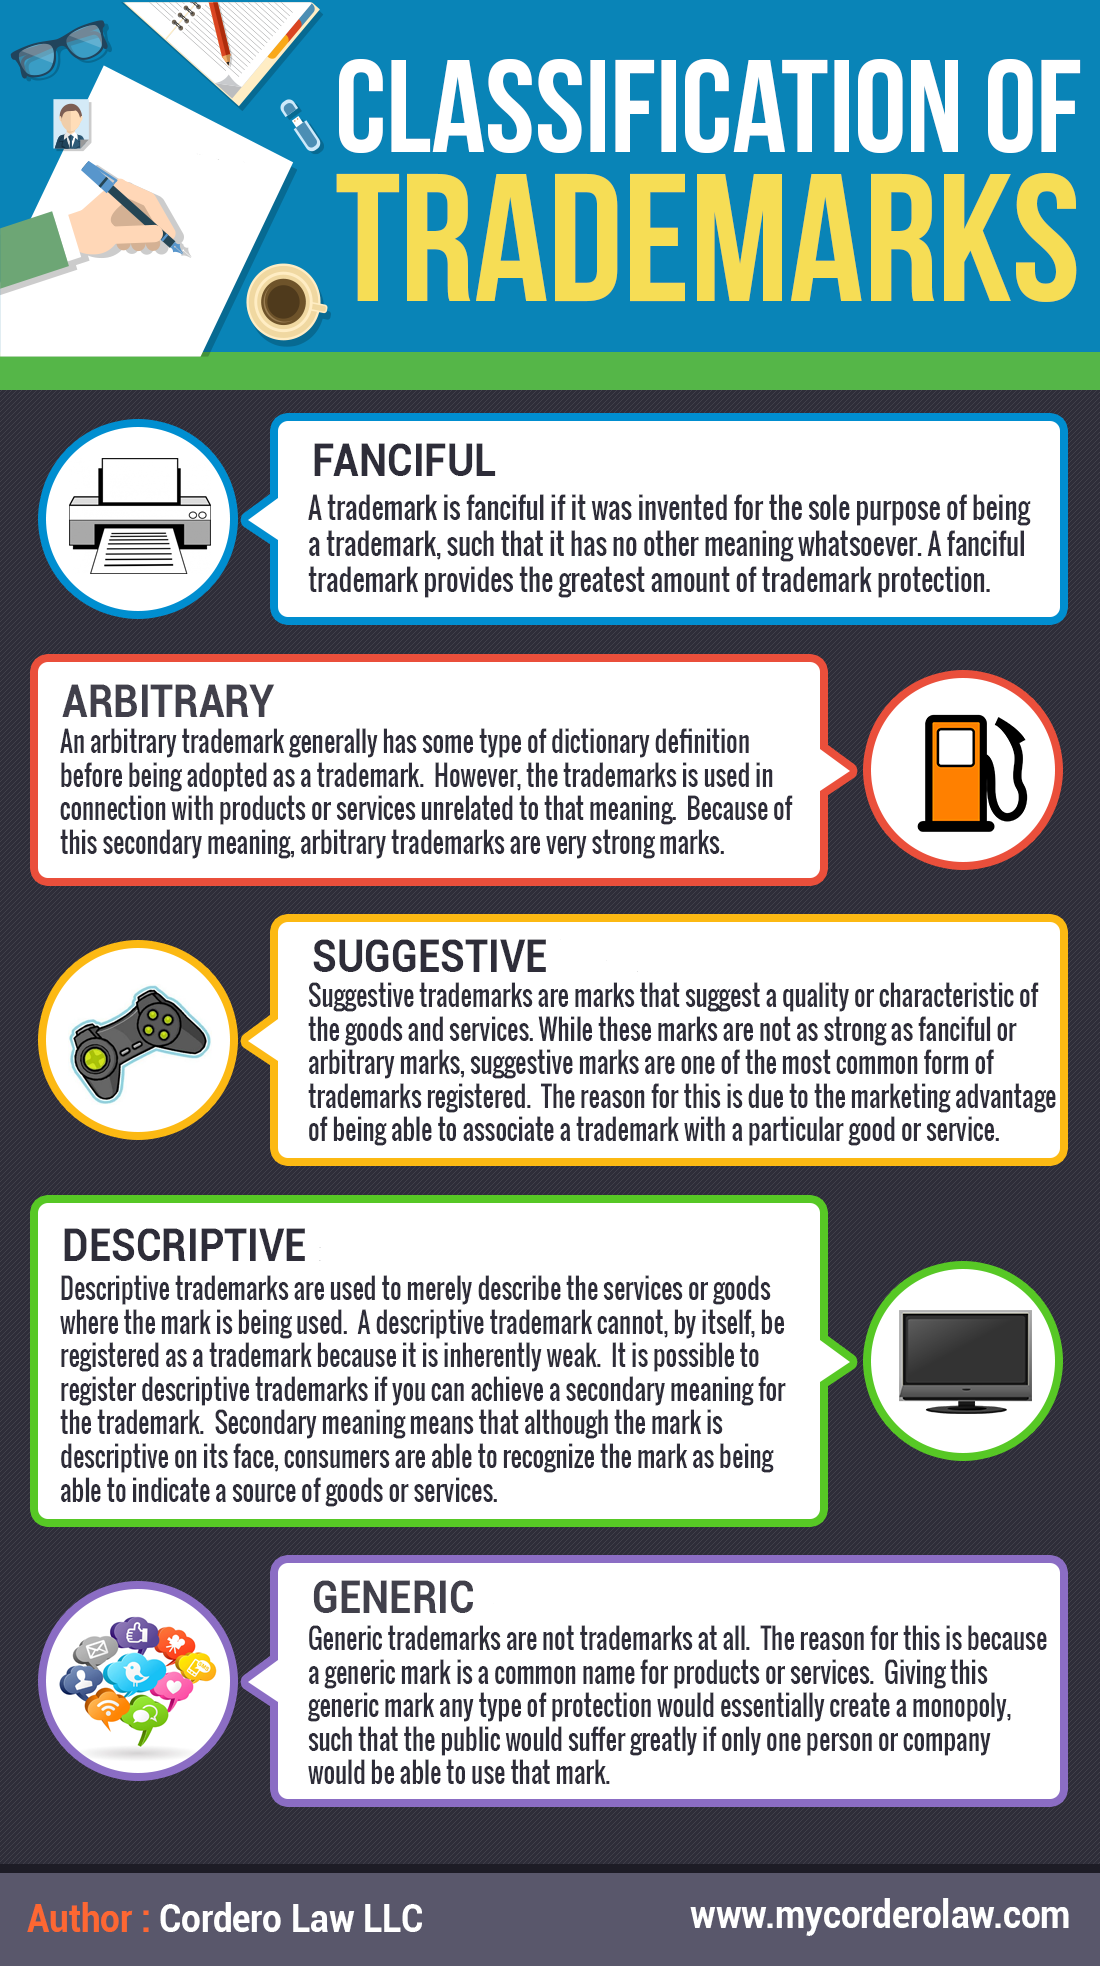  Trademarks are a form of intellectual property. A trademark is used to identify and distinguish the source of the goods or services. There are many categories to describe trademarks. In this infographic by Cordero Law LLC, they are identified.  